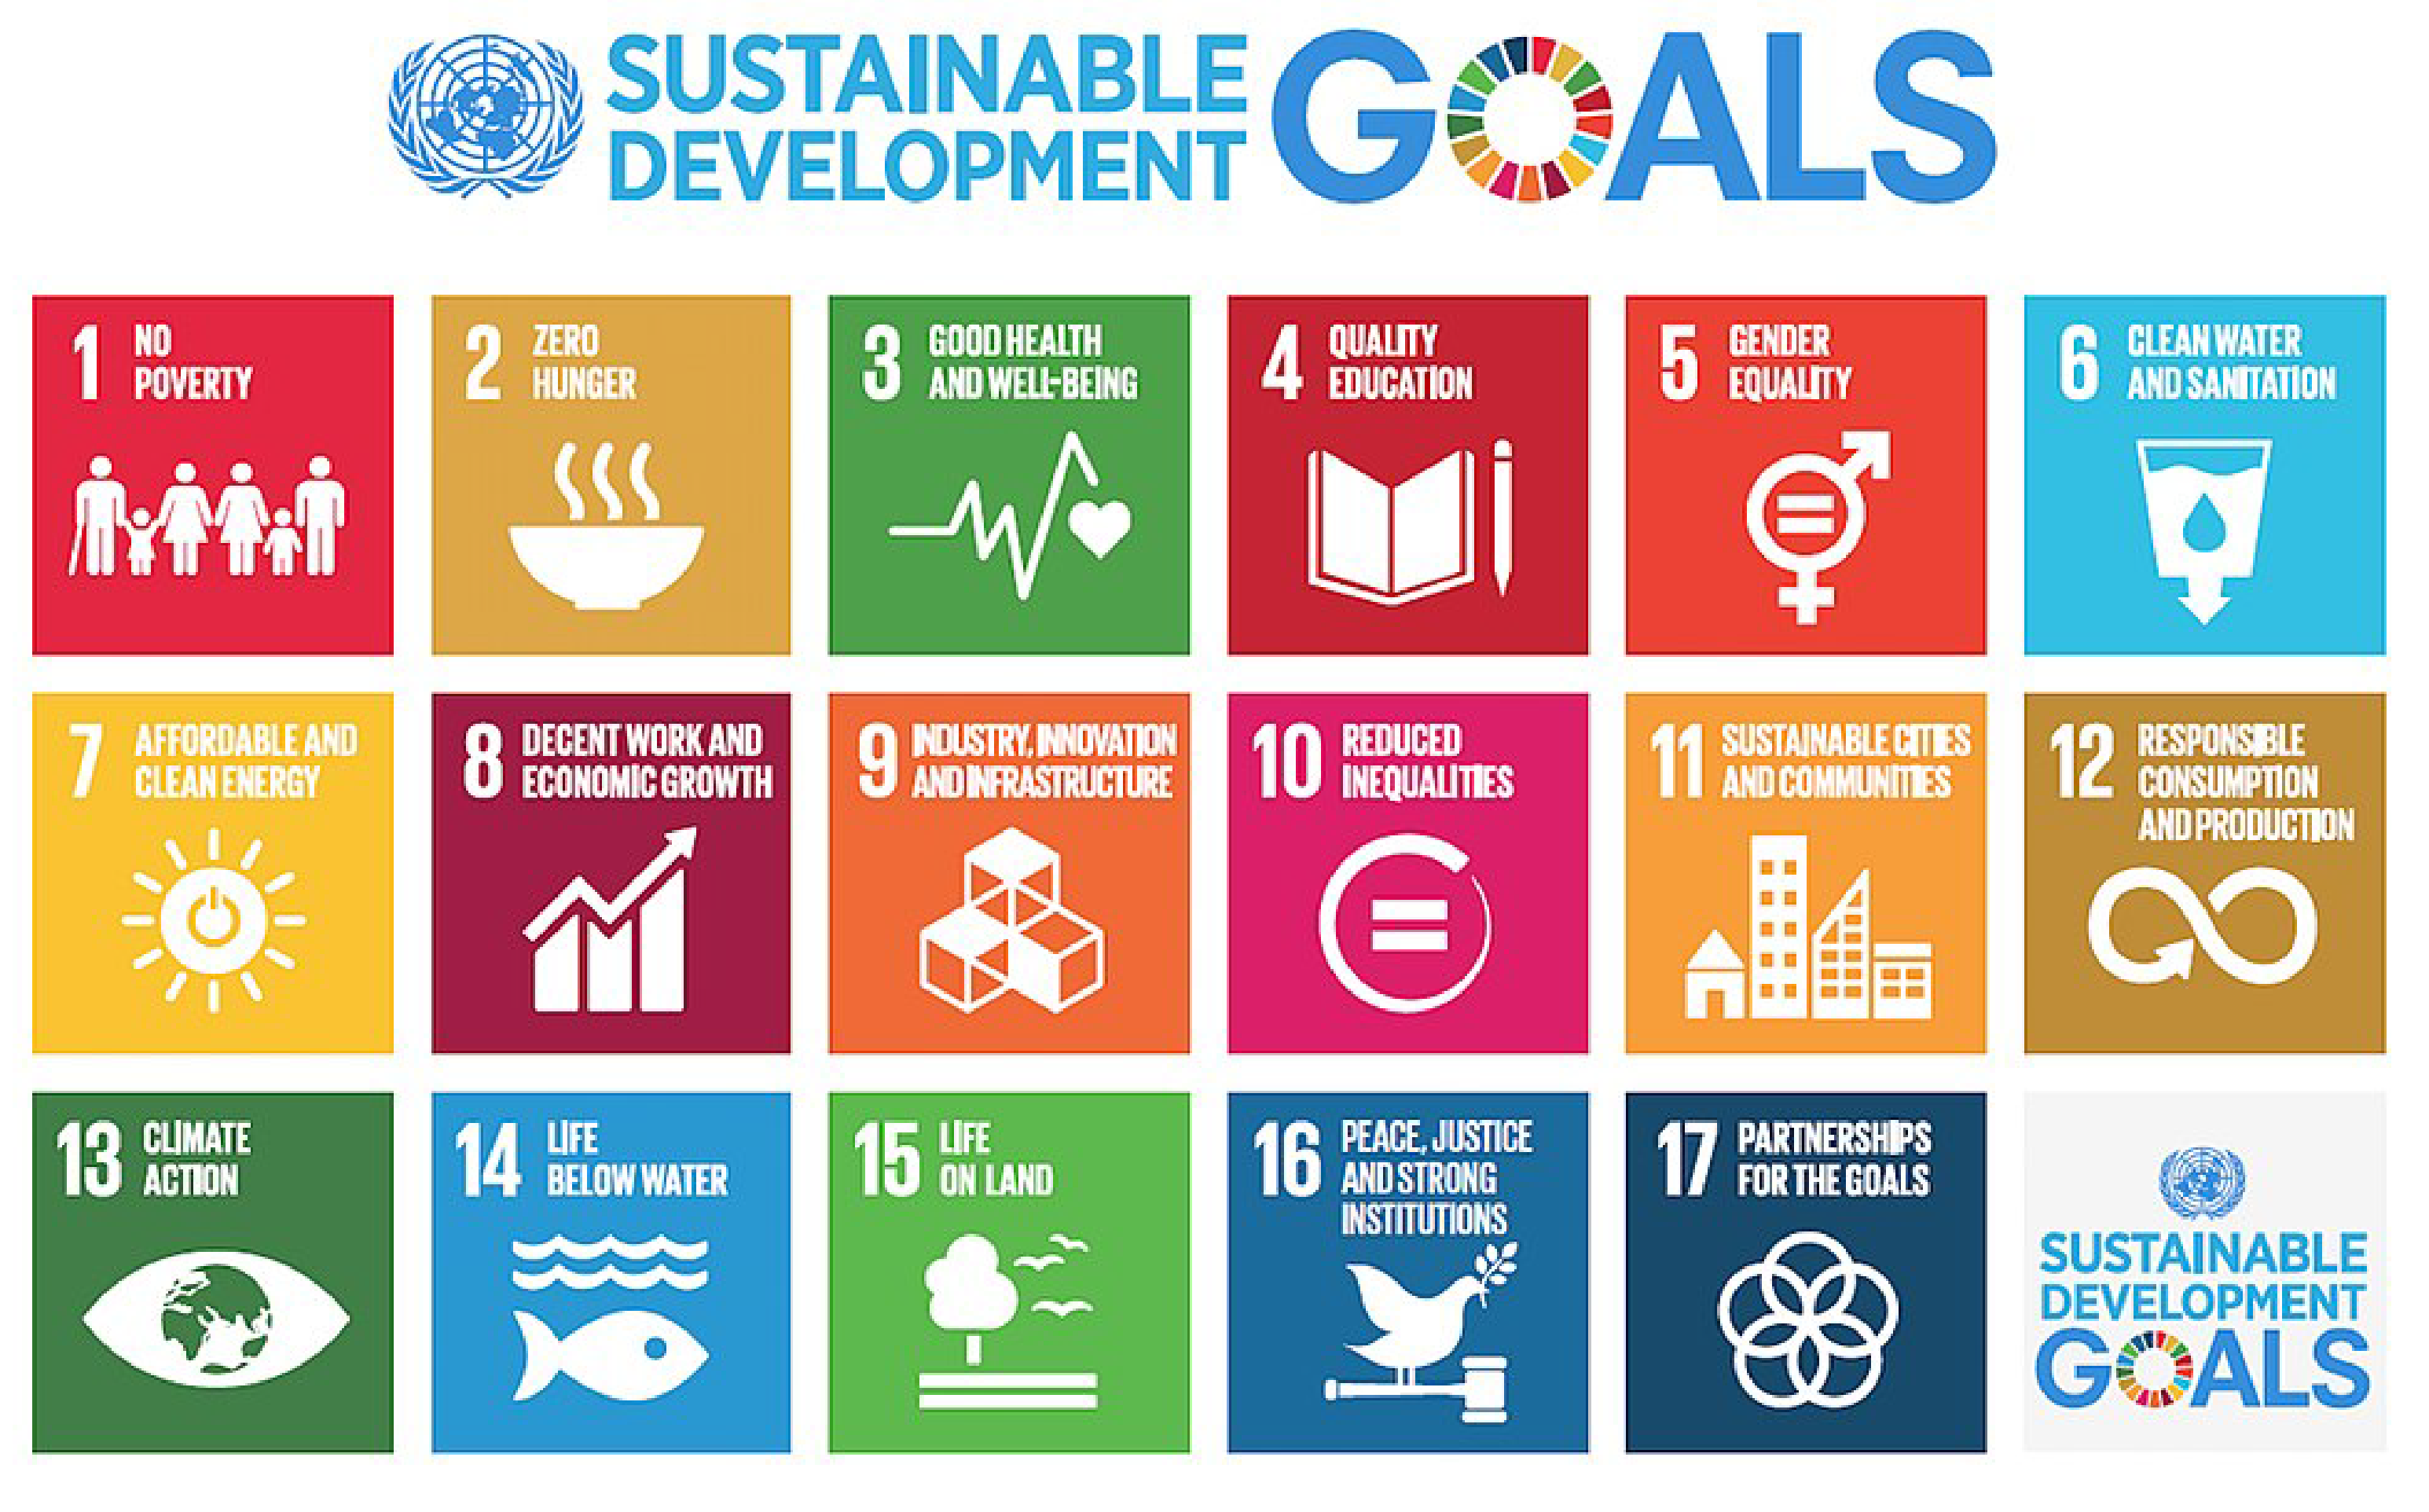 The Sustainable Development Goals, adopted on 25 September 2015 as a part of the 2030 Agenda.